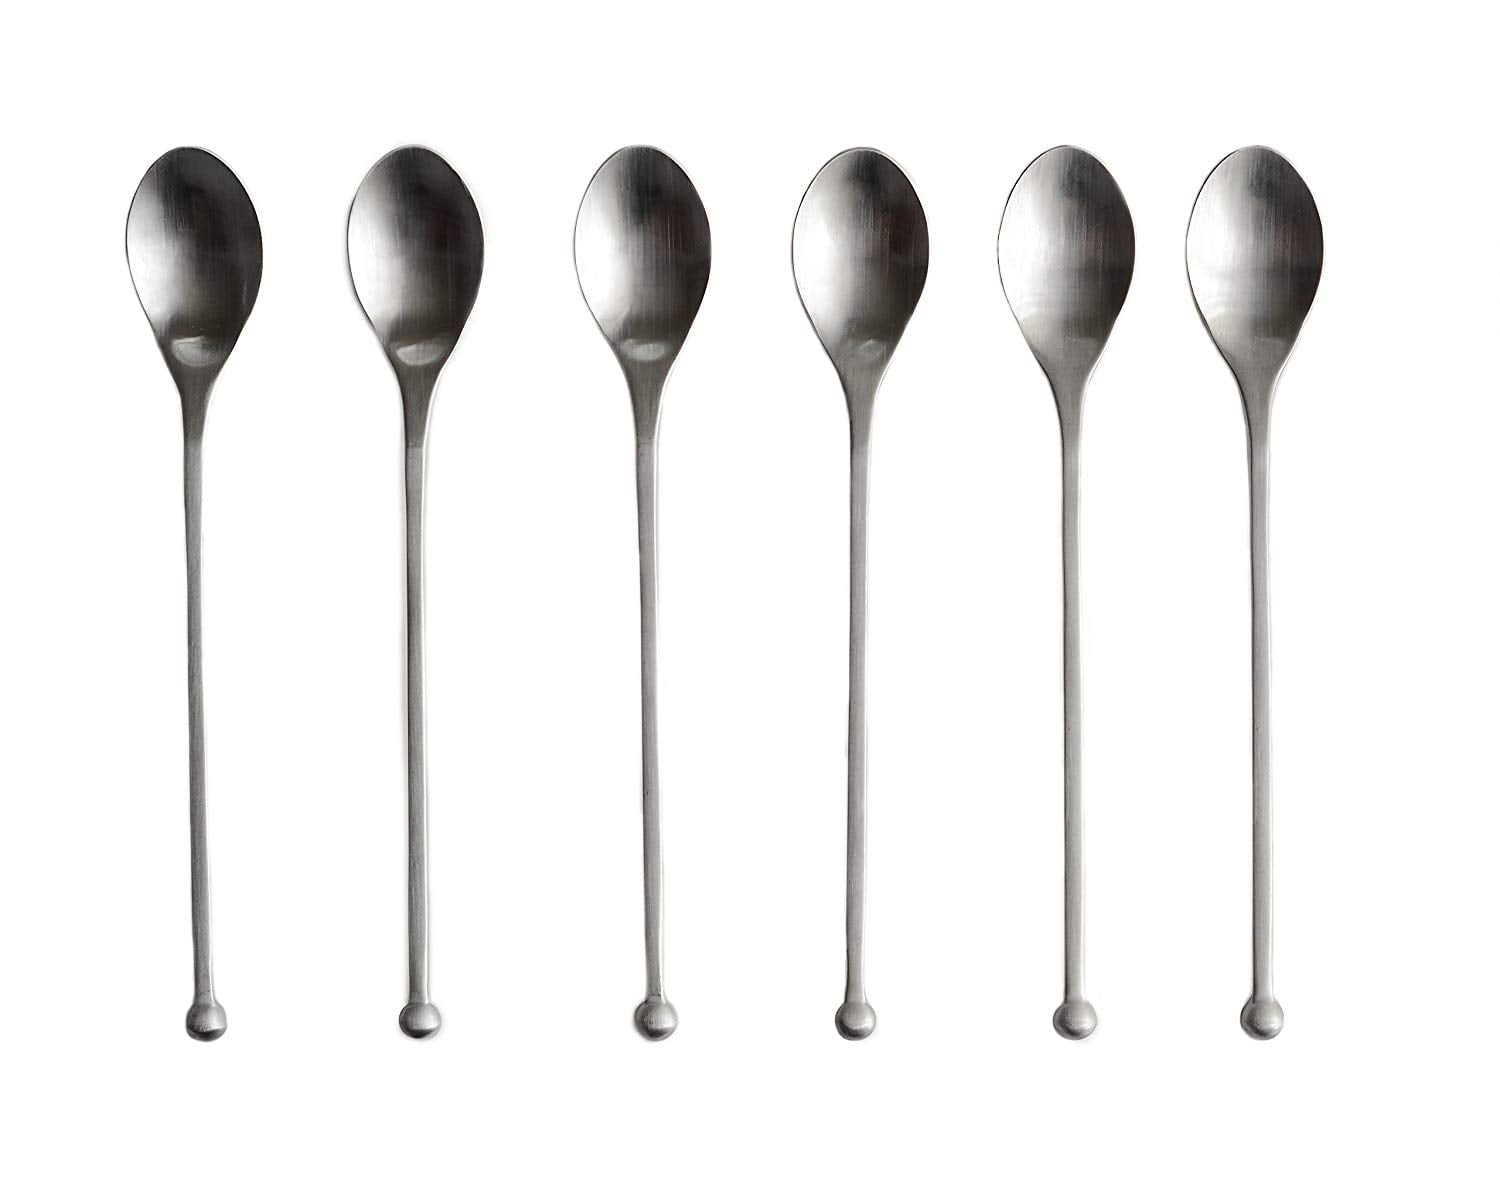 Stainless Steel Cocktail Stirring Spoons KNORK 8-Inch Long Handle Matte Iced Tea Spoon 6 Piece Set 